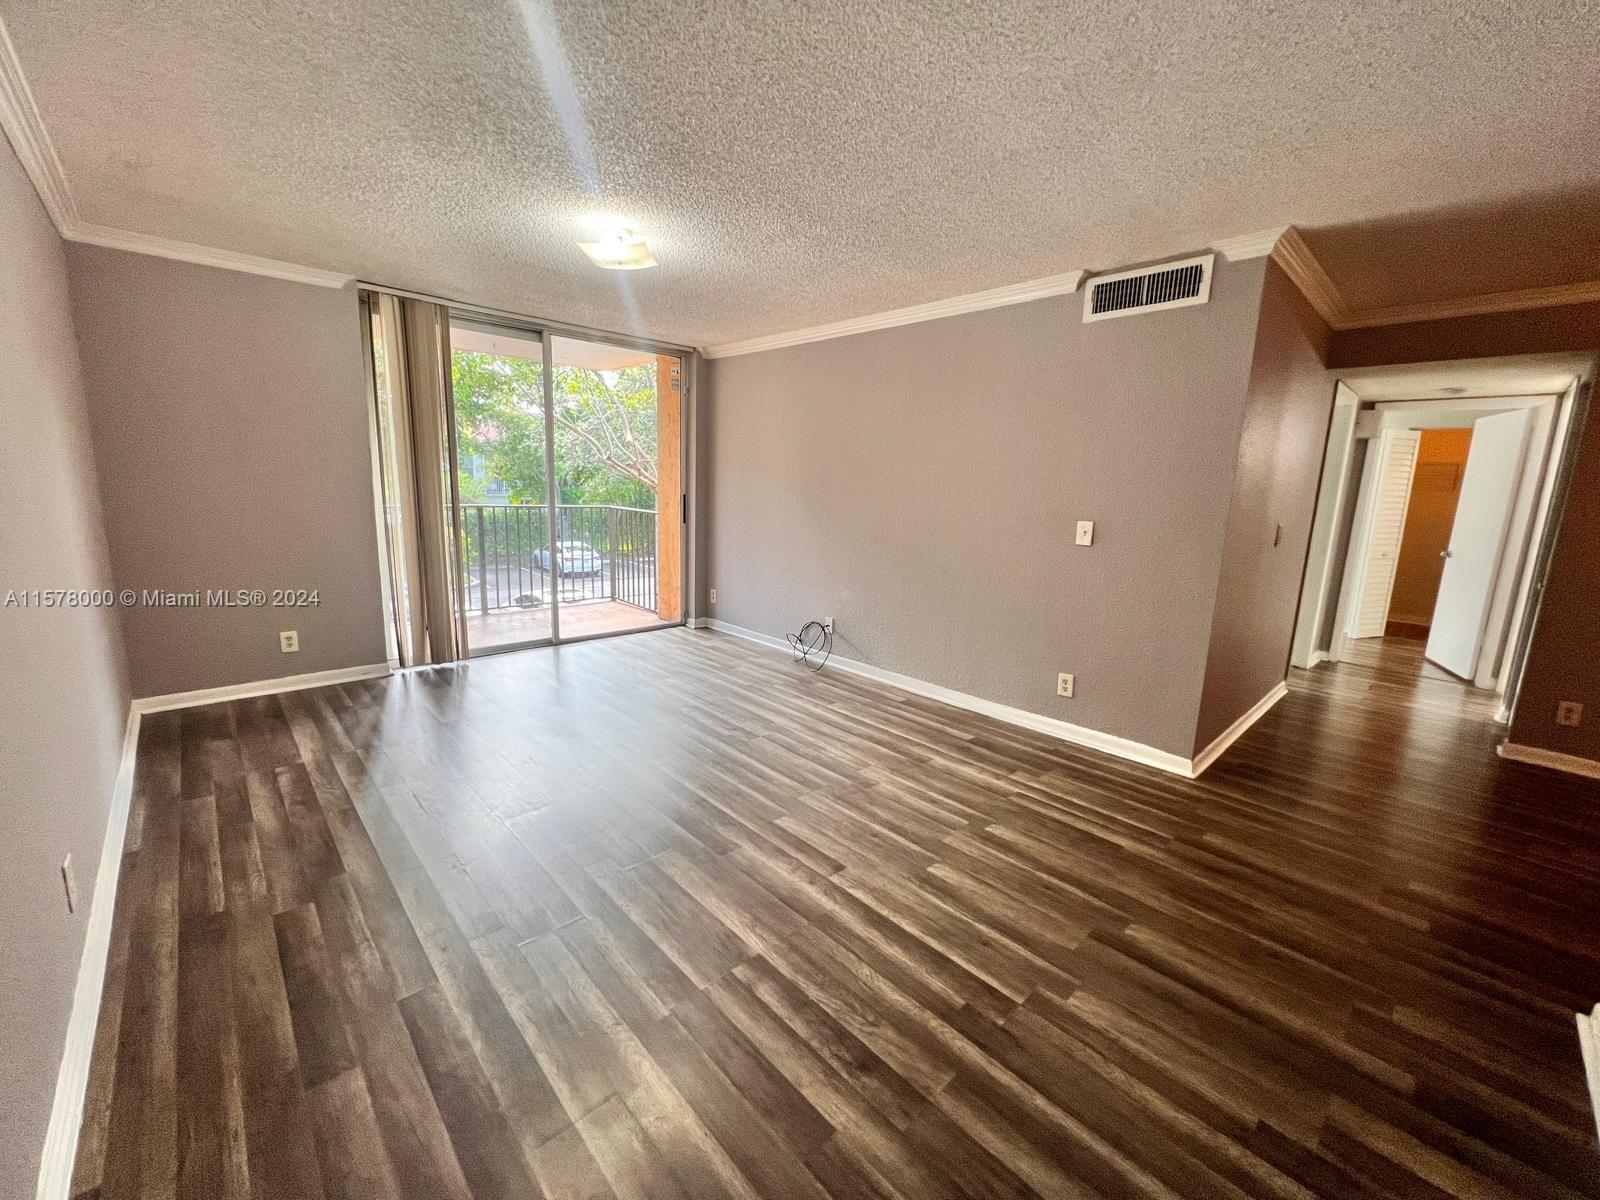 Photo of 10773 Cleary Blvd #203 in Plantation, FL